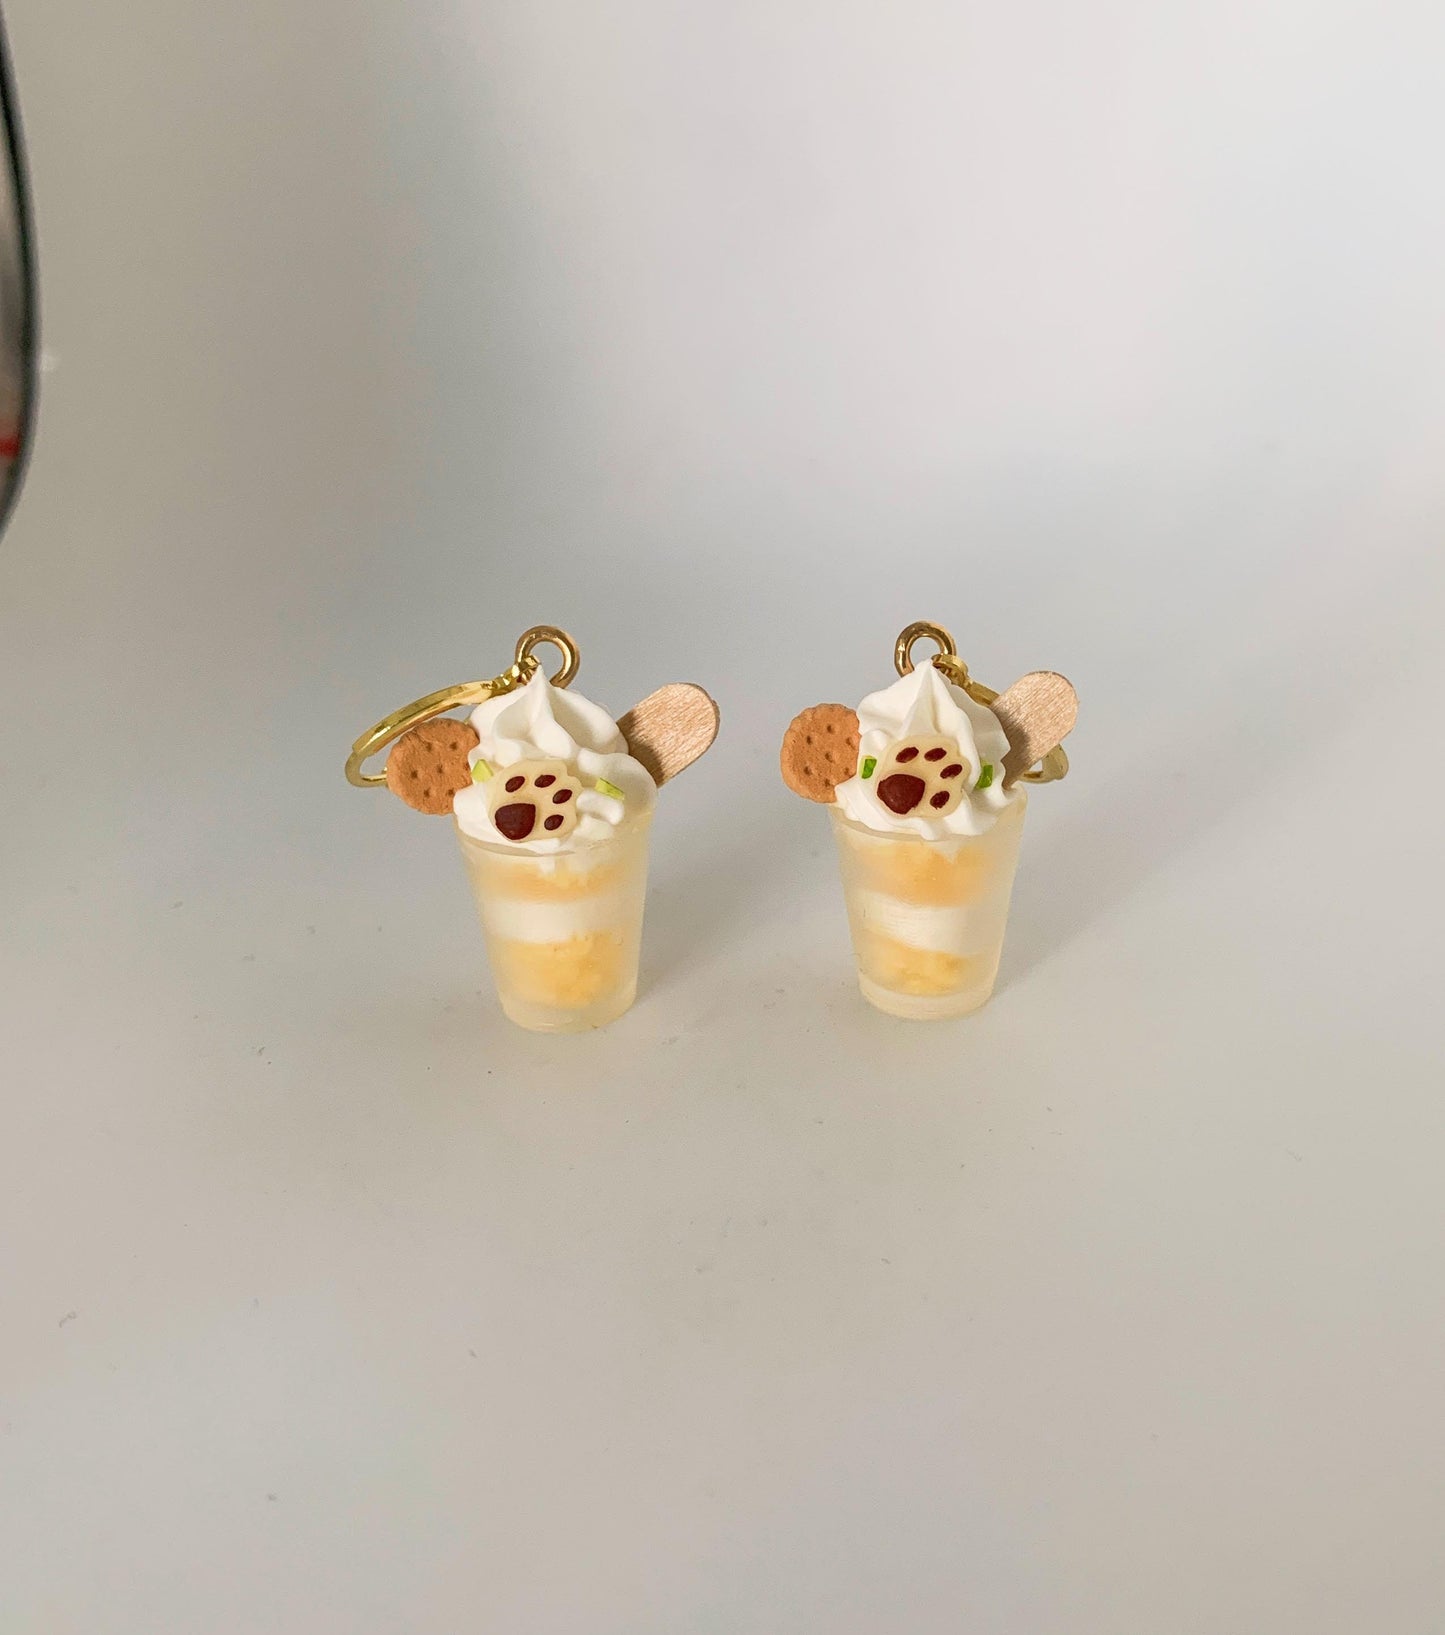 The Pawppuccino Earrings